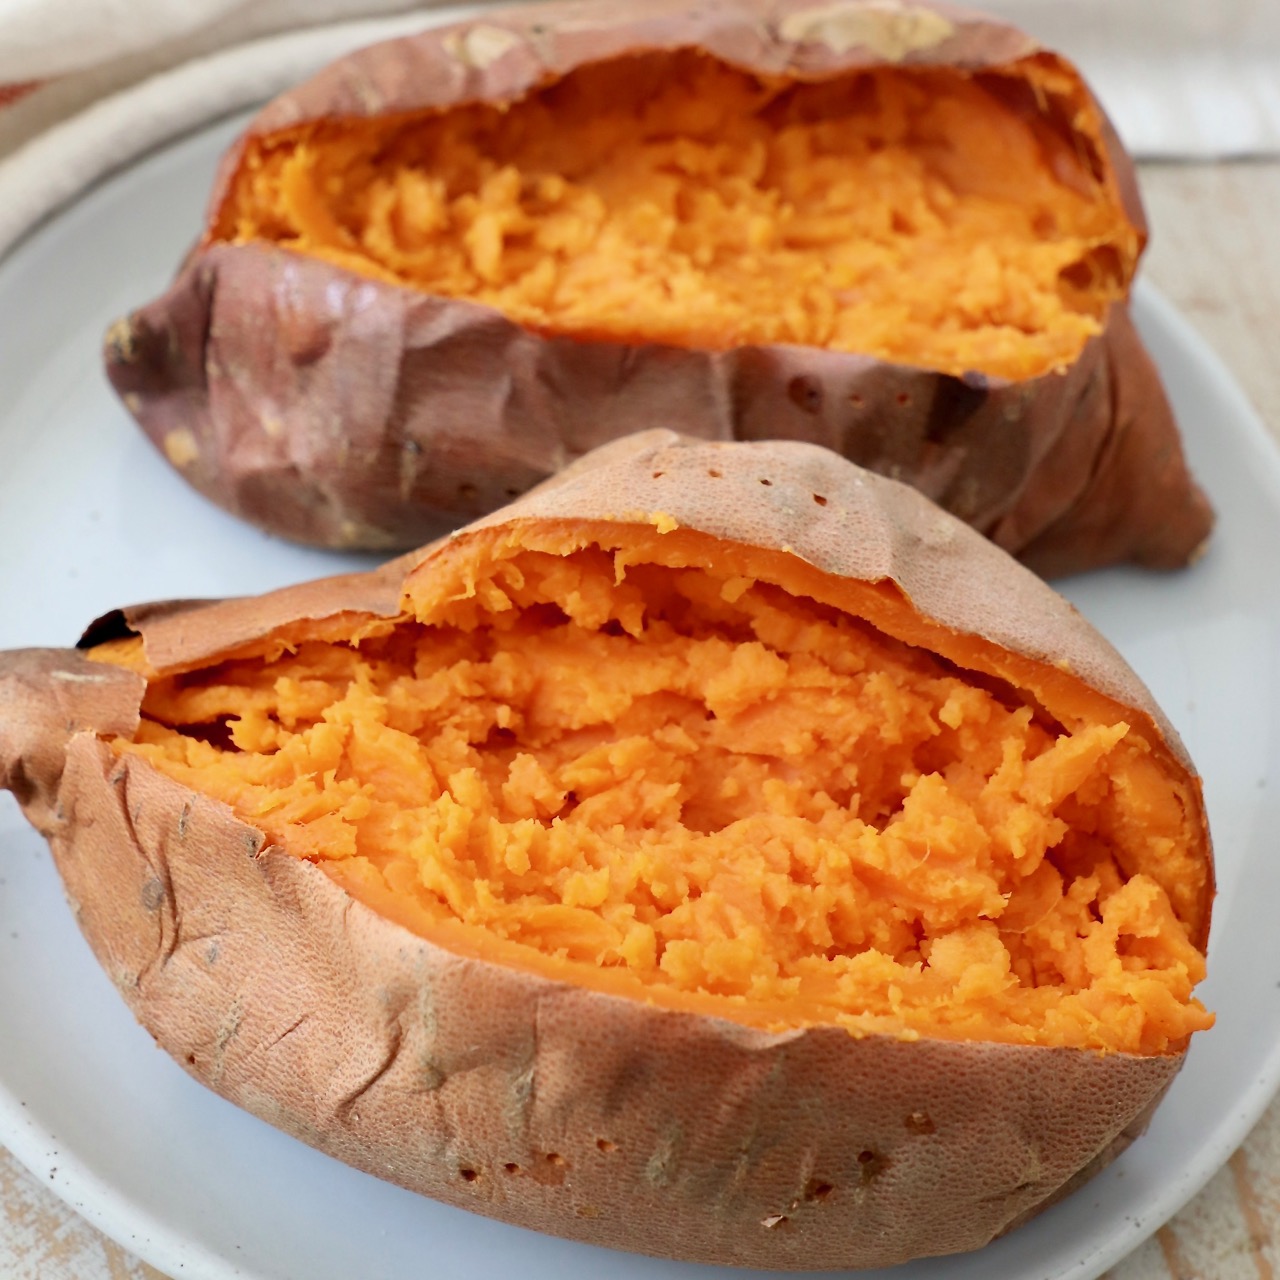 INSTANT POT SWEET POTATOES  HOW TO COOK PERFECT SWEET POTATOES